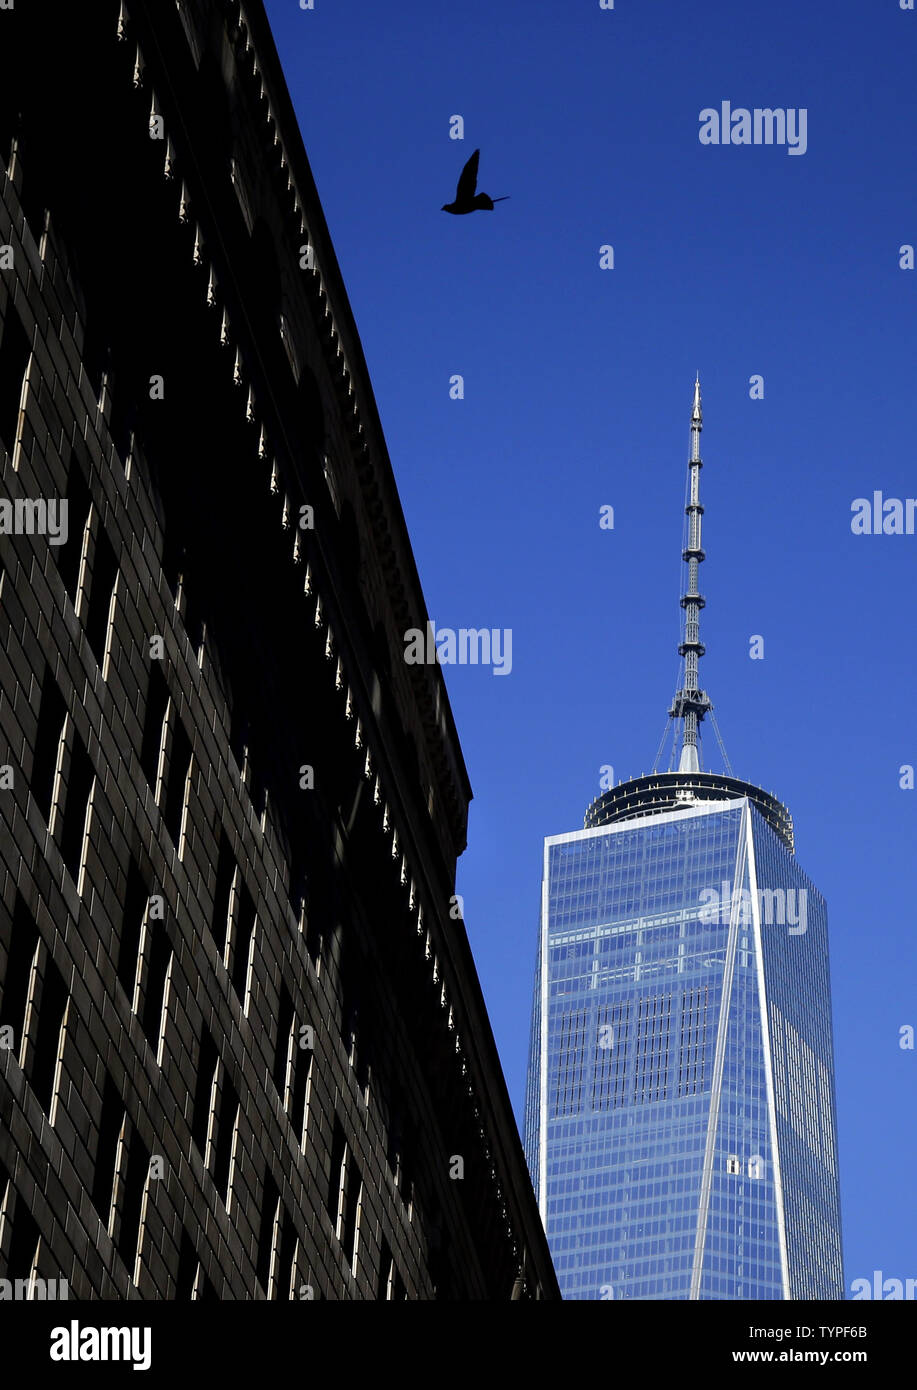 https://c8.alamy.com/comp/TYPF6B/a-bird-flies-in-the-shadows-of-one-world-trade-center-in-new-york-city-on-november-3-2014-thirteen-years-after-the-911-terrorist-attack-the-resurrected-world-trade-center-has-opened-for-business-some-of-publishing-giant-conde-nasts-staffers-began-working-at-one-world-trade-center-on-today-upijohn-angelillo-TYPF6B.jpg